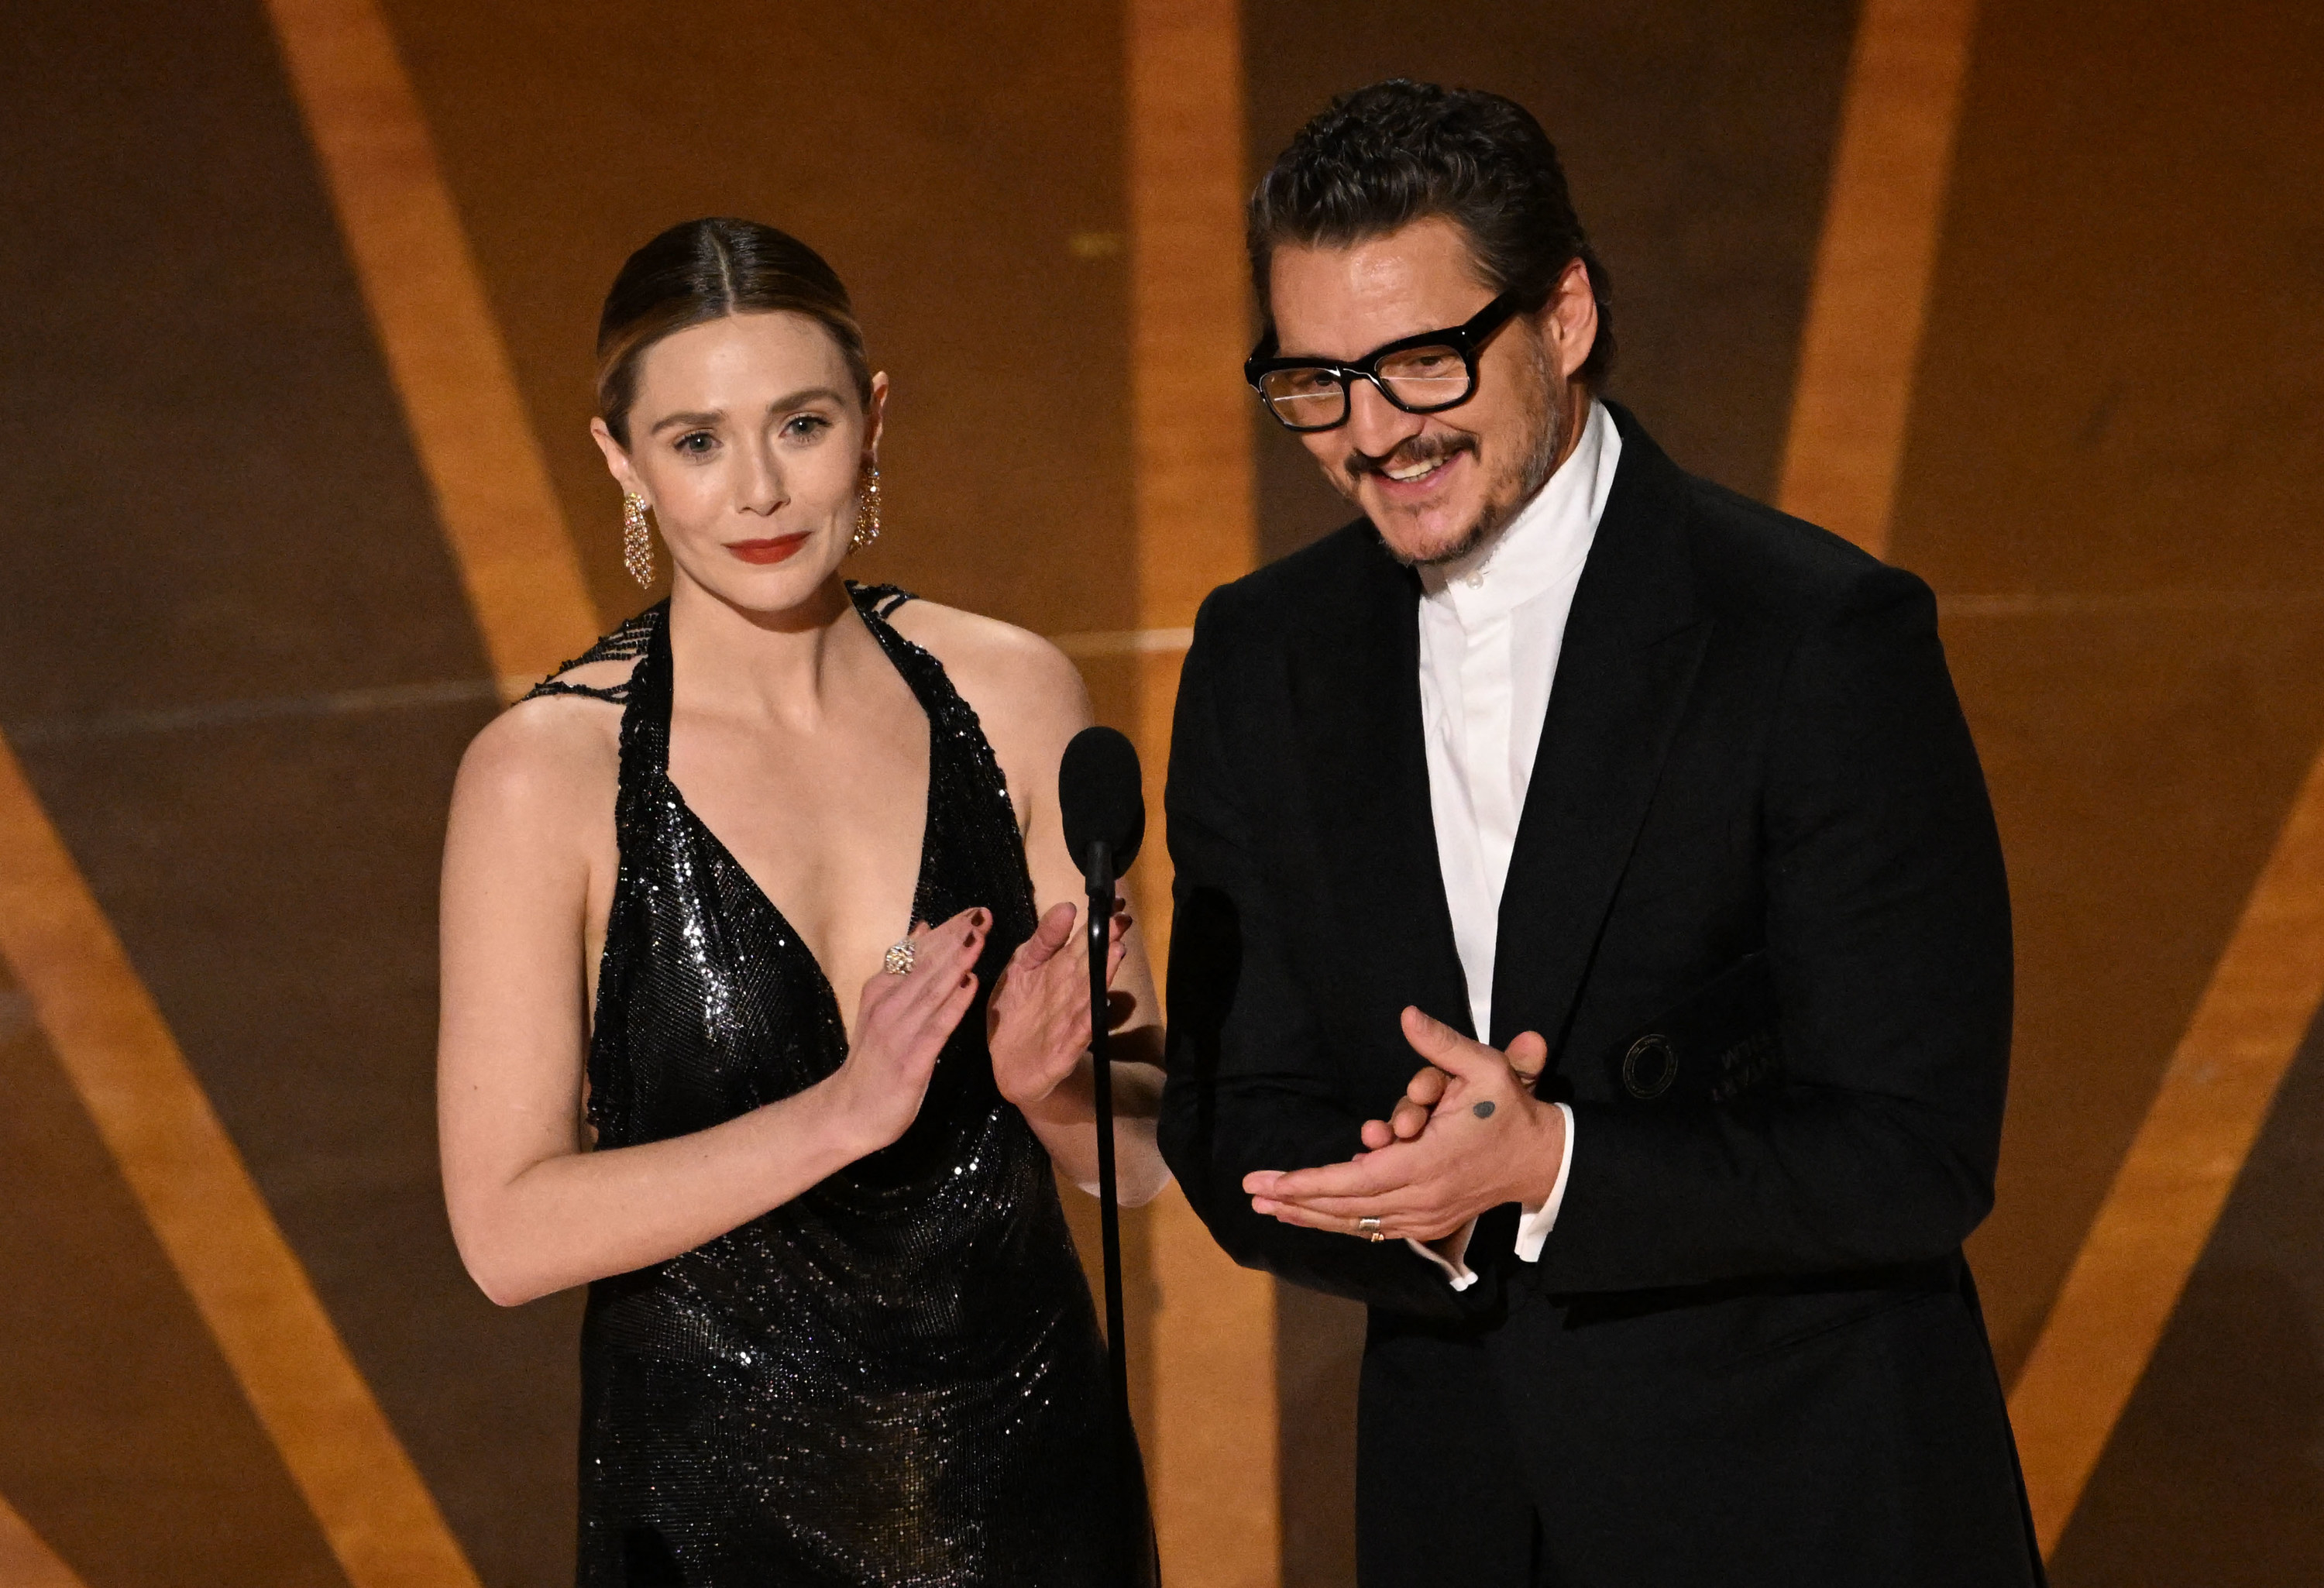 Elizabeth, on the left, claps as she and Pedro announce an award